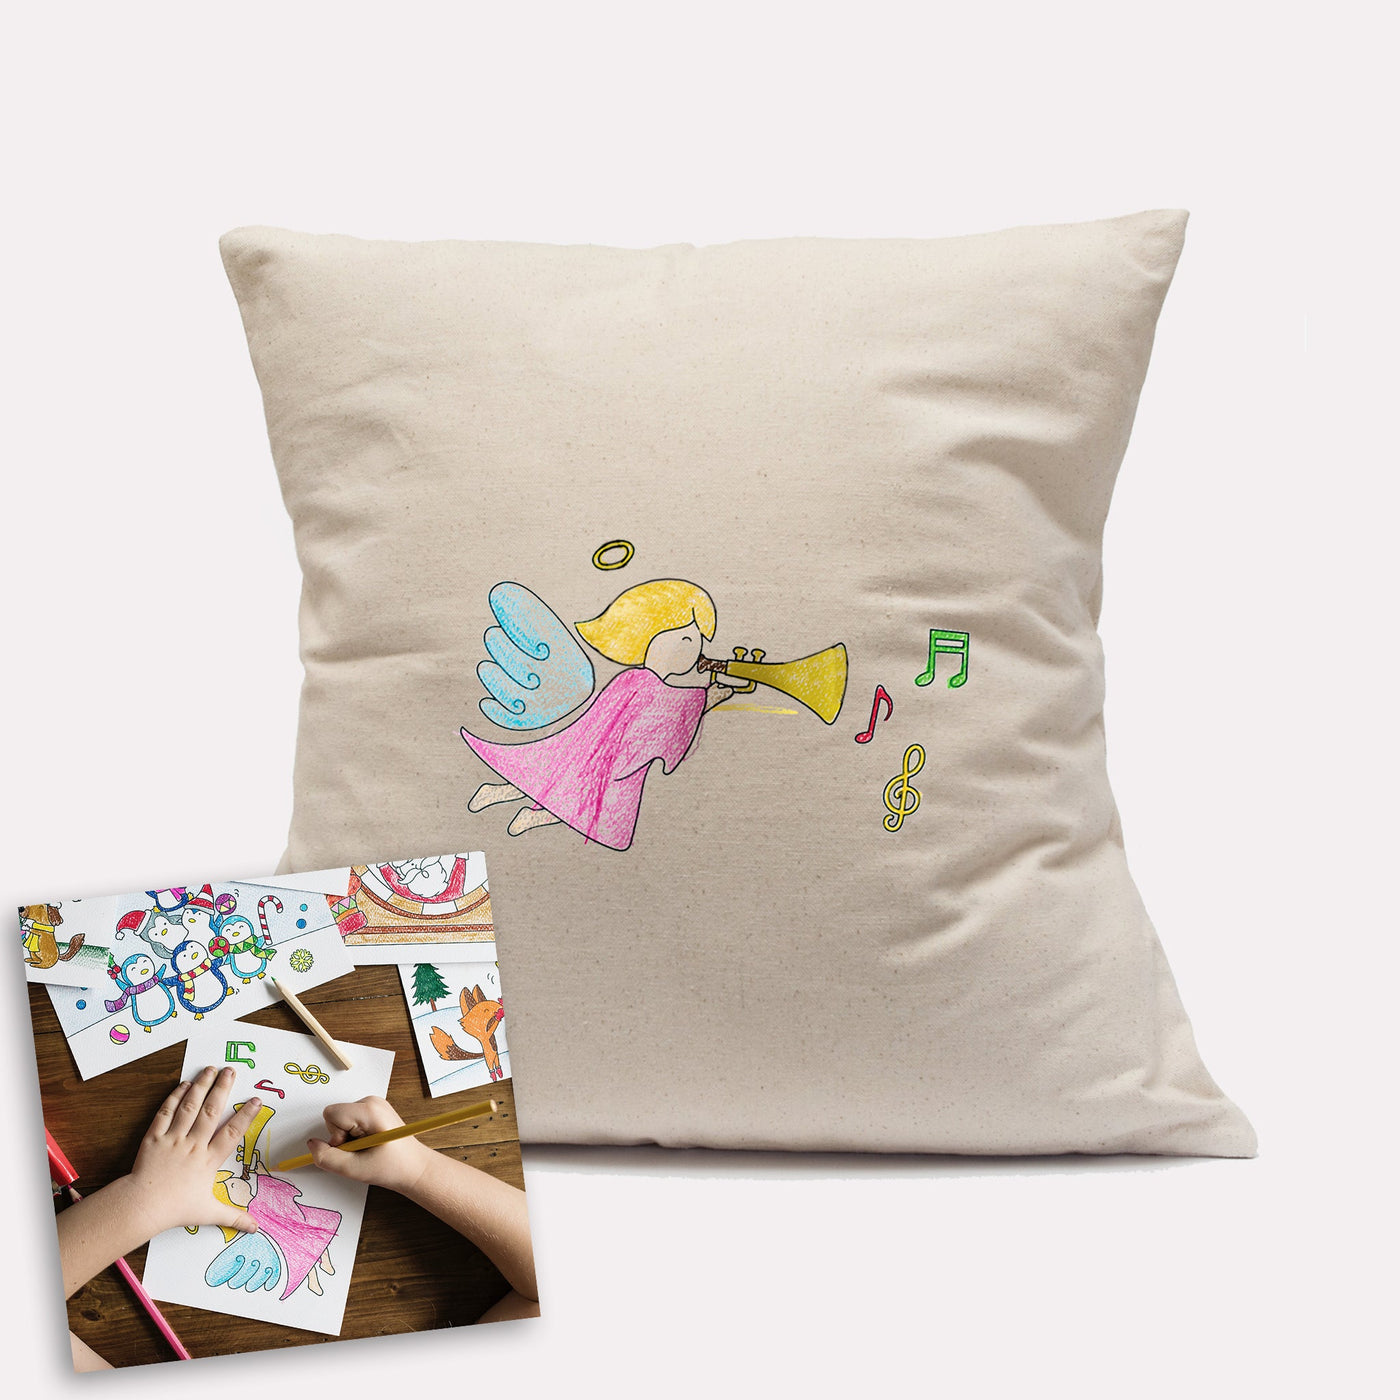 Natural Canvas Custom Kid's Artwork Decorative Pillow - The Printed Gift